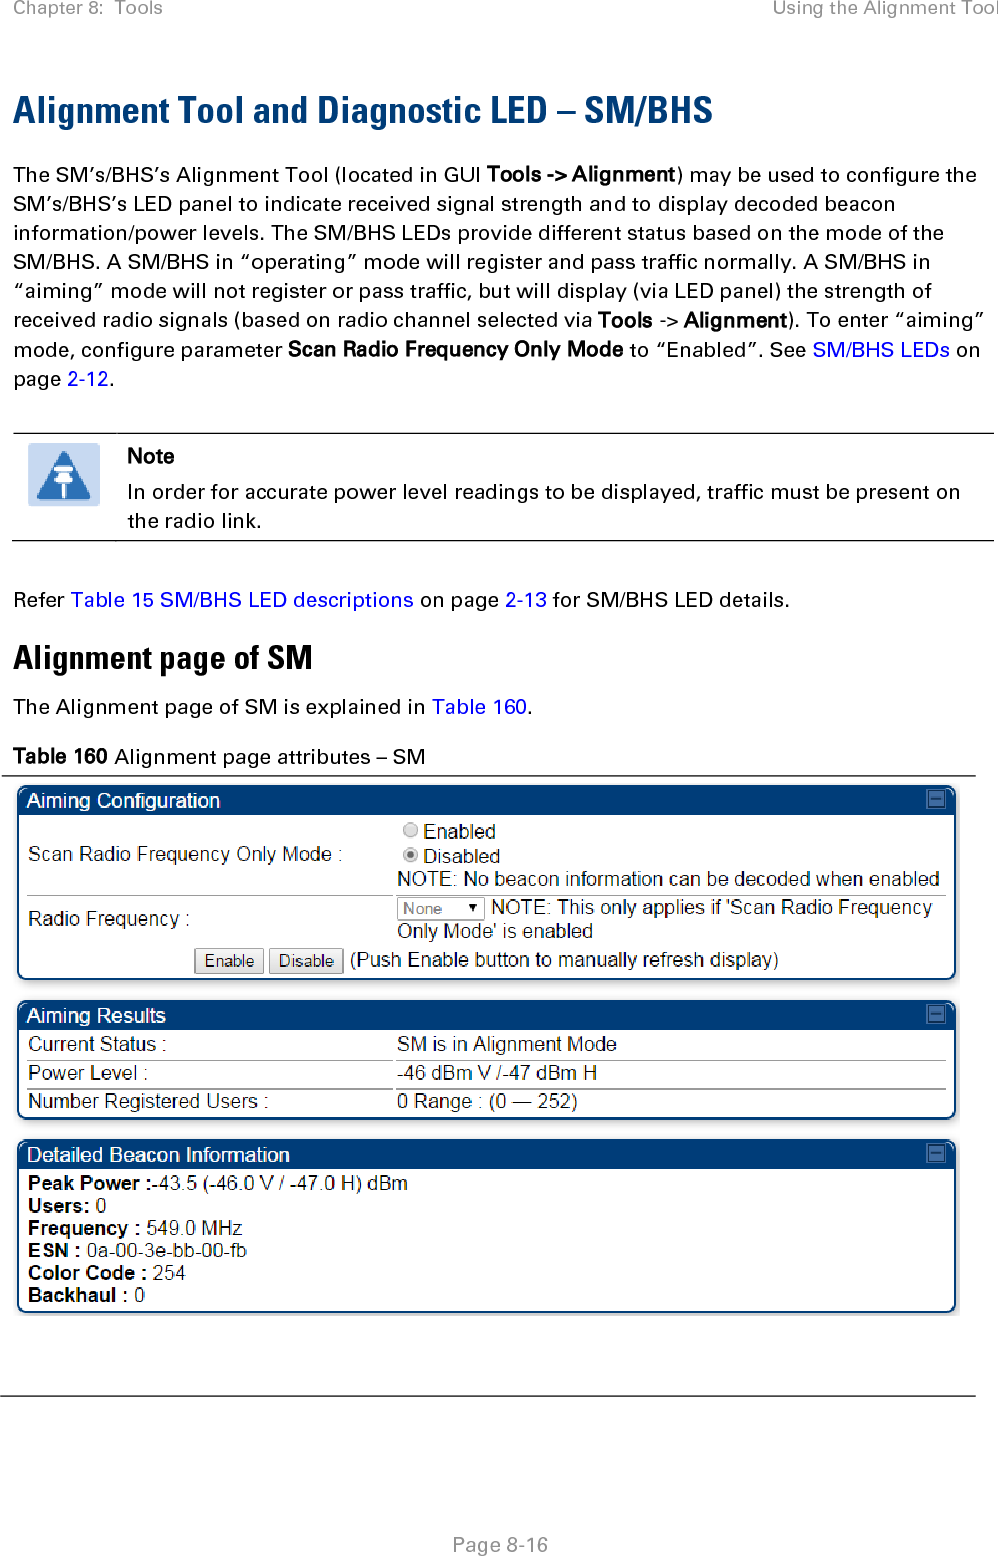 Chapter 8:  Tools Using the Alignment Tool   Page 8-16 Alignment Tool and Diagnostic LED – SM/BHS The SM’s/BHS’s Alignment Tool (located in GUI Tools -&gt; Alignment) may be used to configure the SM’s/BHS’s LED panel to indicate received signal strength and to display decoded beacon information/power levels. The SM/BHS LEDs provide different status based on the mode of the SM/BHS. A SM/BHS in “operating” mode will register and pass traffic normally. A SM/BHS in “aiming” mode will not register or pass traffic, but will display (via LED panel) the strength of received radio signals (based on radio channel selected via Tools -&gt; Alignment). To enter “aiming” mode, configure parameter Scan Radio Frequency Only Mode to “Enabled”. See SM/BHS LEDs on page 2-12.   Note In order for accurate power level readings to be displayed, traffic must be present on the radio link.  Refer Table 15 SM/BHS LED descriptions on page 2-13 for SM/BHS LED details. Alignment page of SM The Alignment page of SM is explained in Table 160. Table 160 Alignment page attributes – SM    